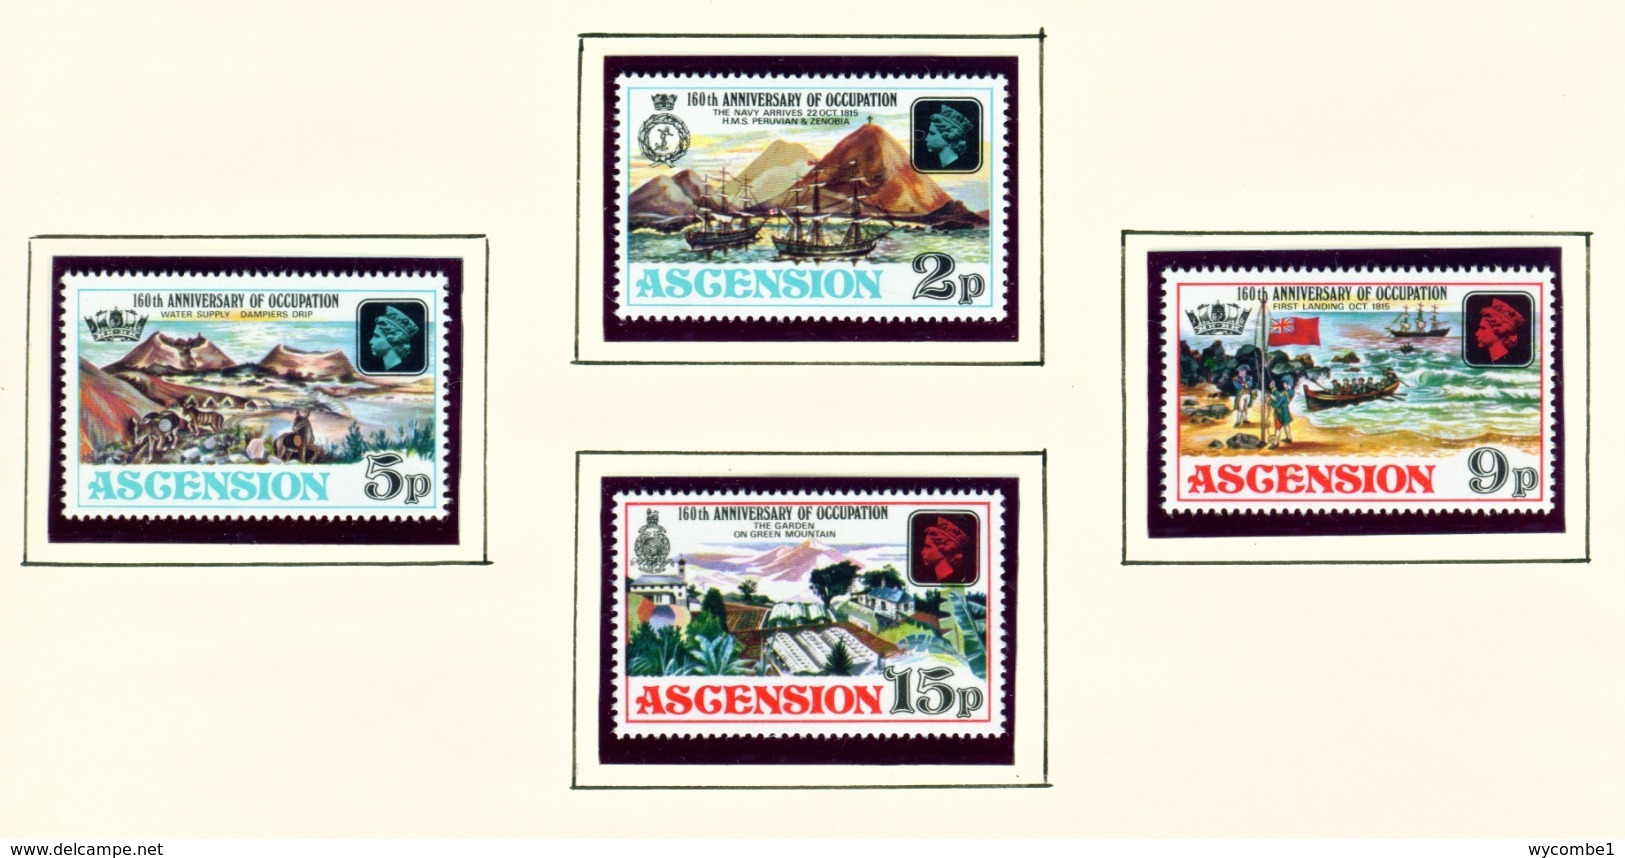 ASCENSION  -  1975 Occupation Anniversary Set Unmounted/Never Hinged Mint - Ascension